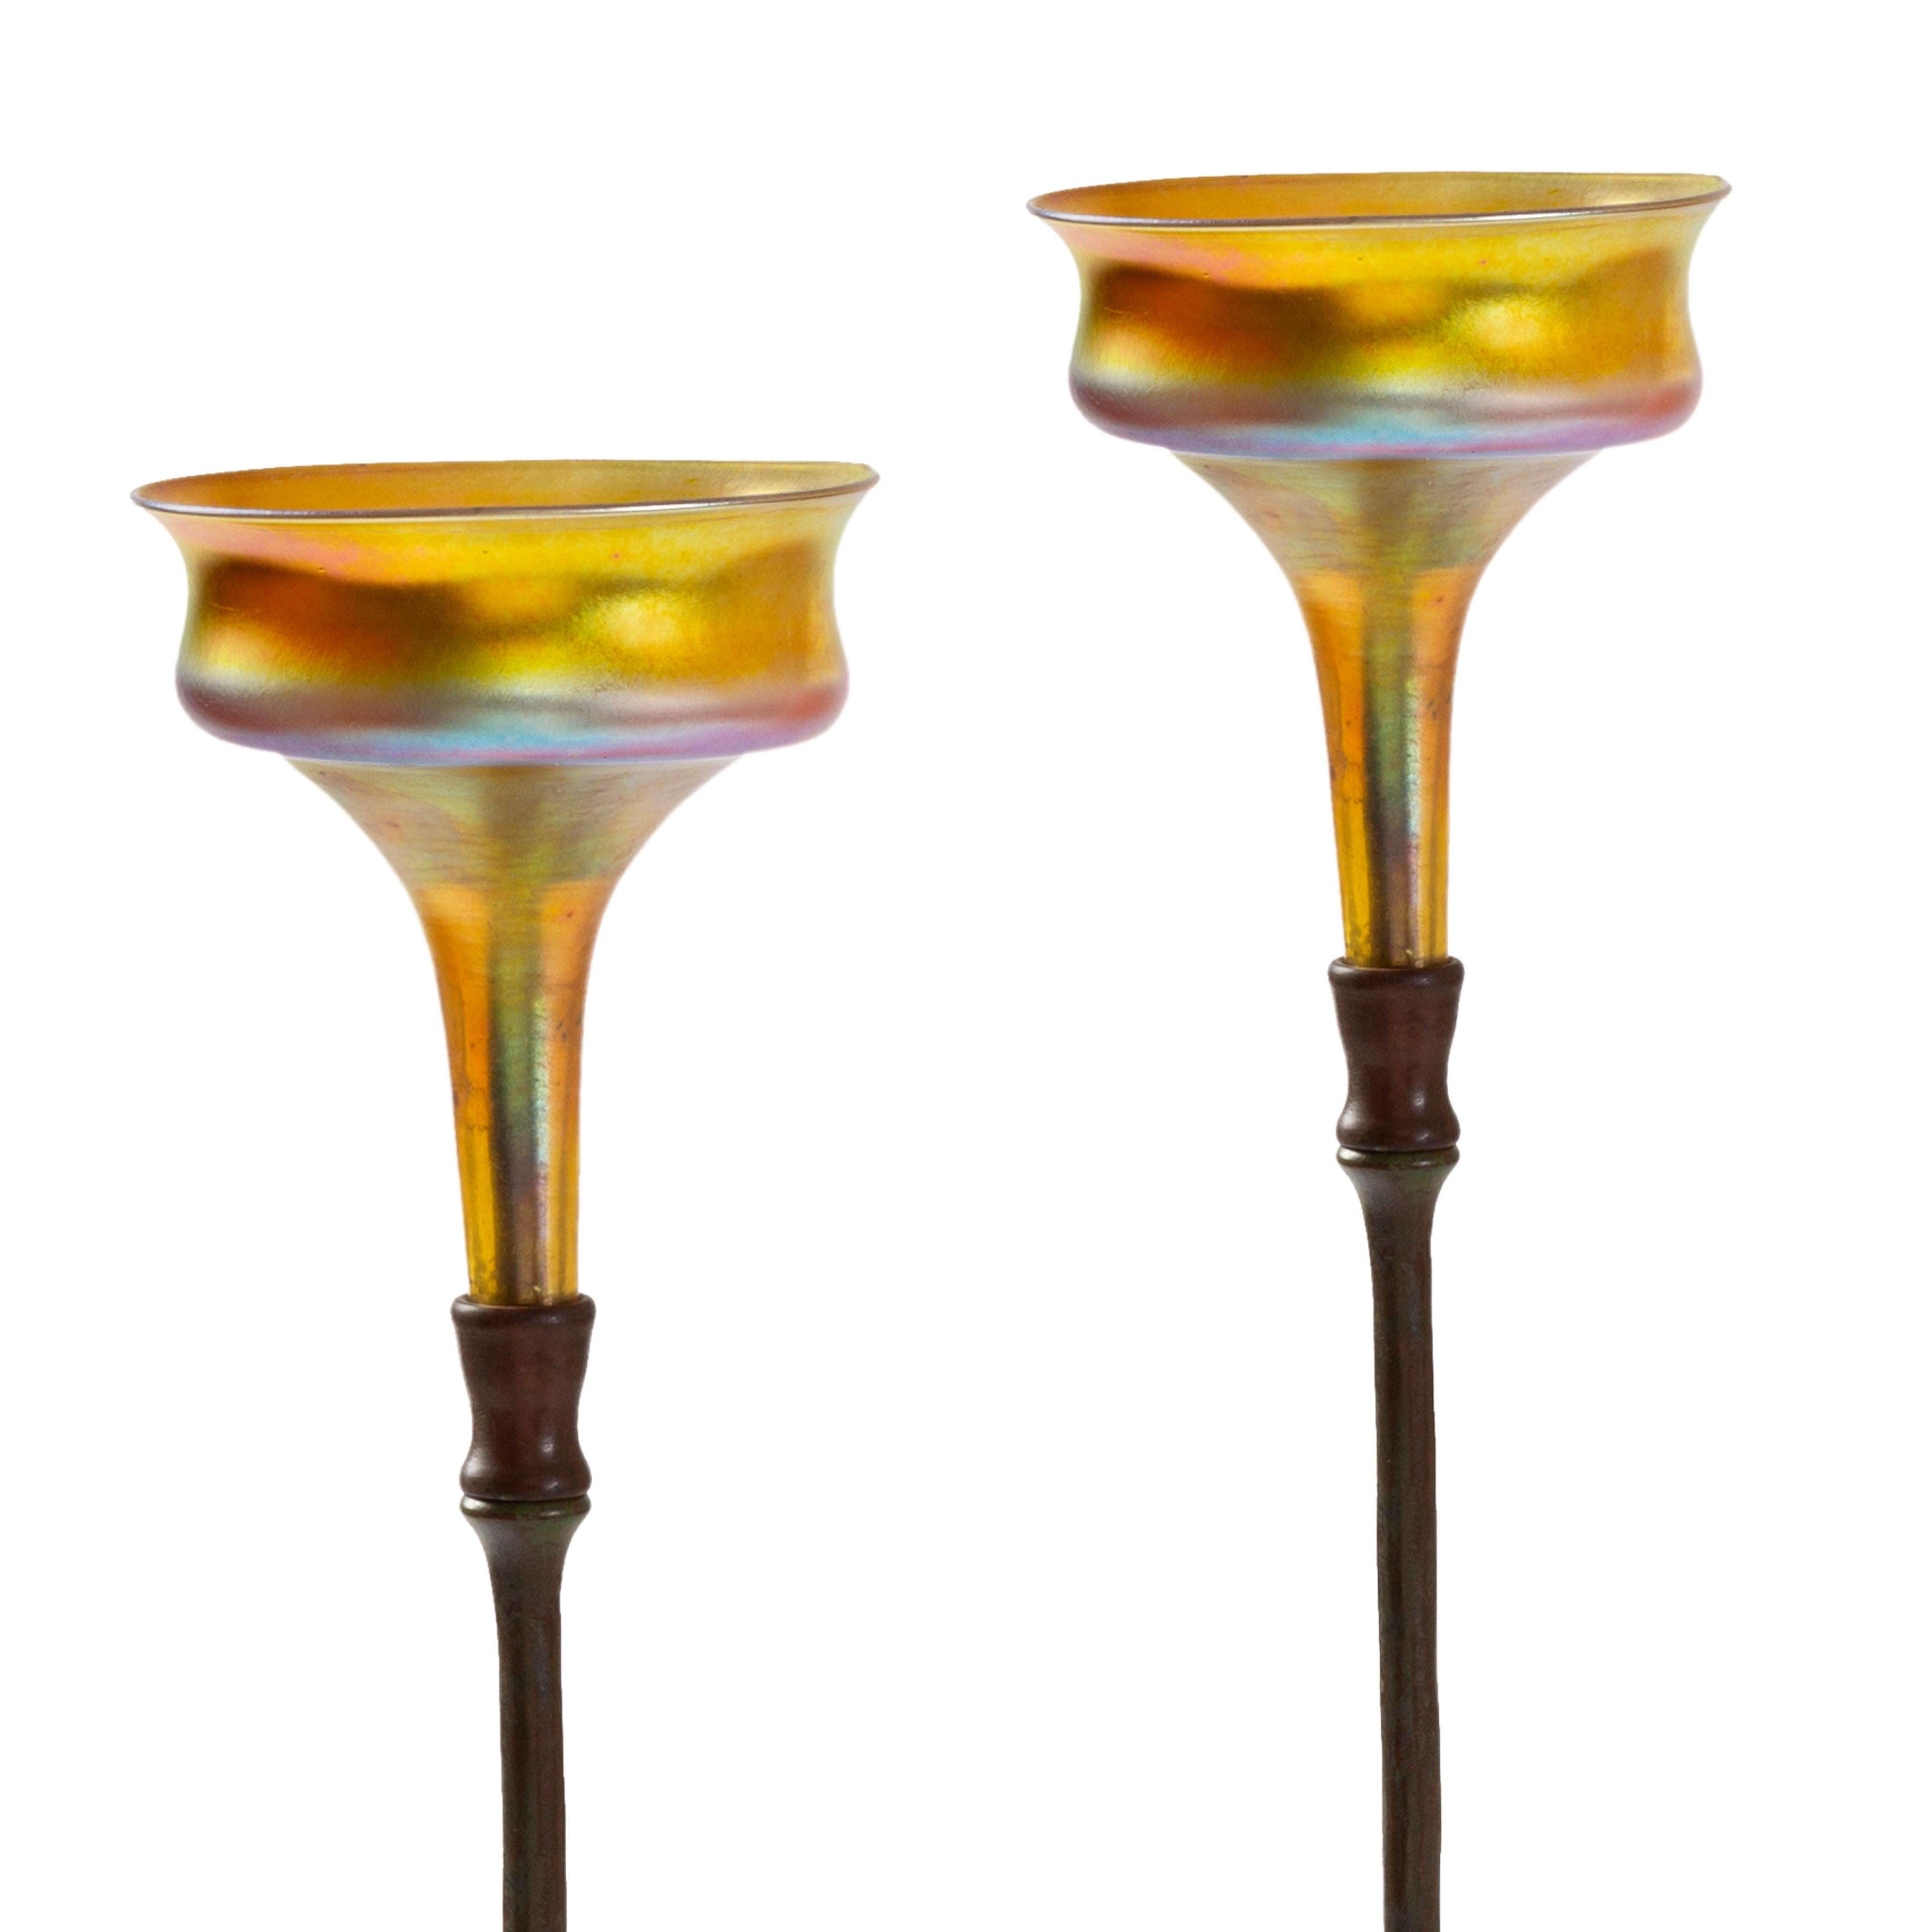 A pair of tall and slender Tiffany Studios New York patinated-bronze candelabra with multihued iridescent blown glass champagne tops. A large disc with rippled edge and swirling texture serves as the foot of the composition, from which a rigid stem,